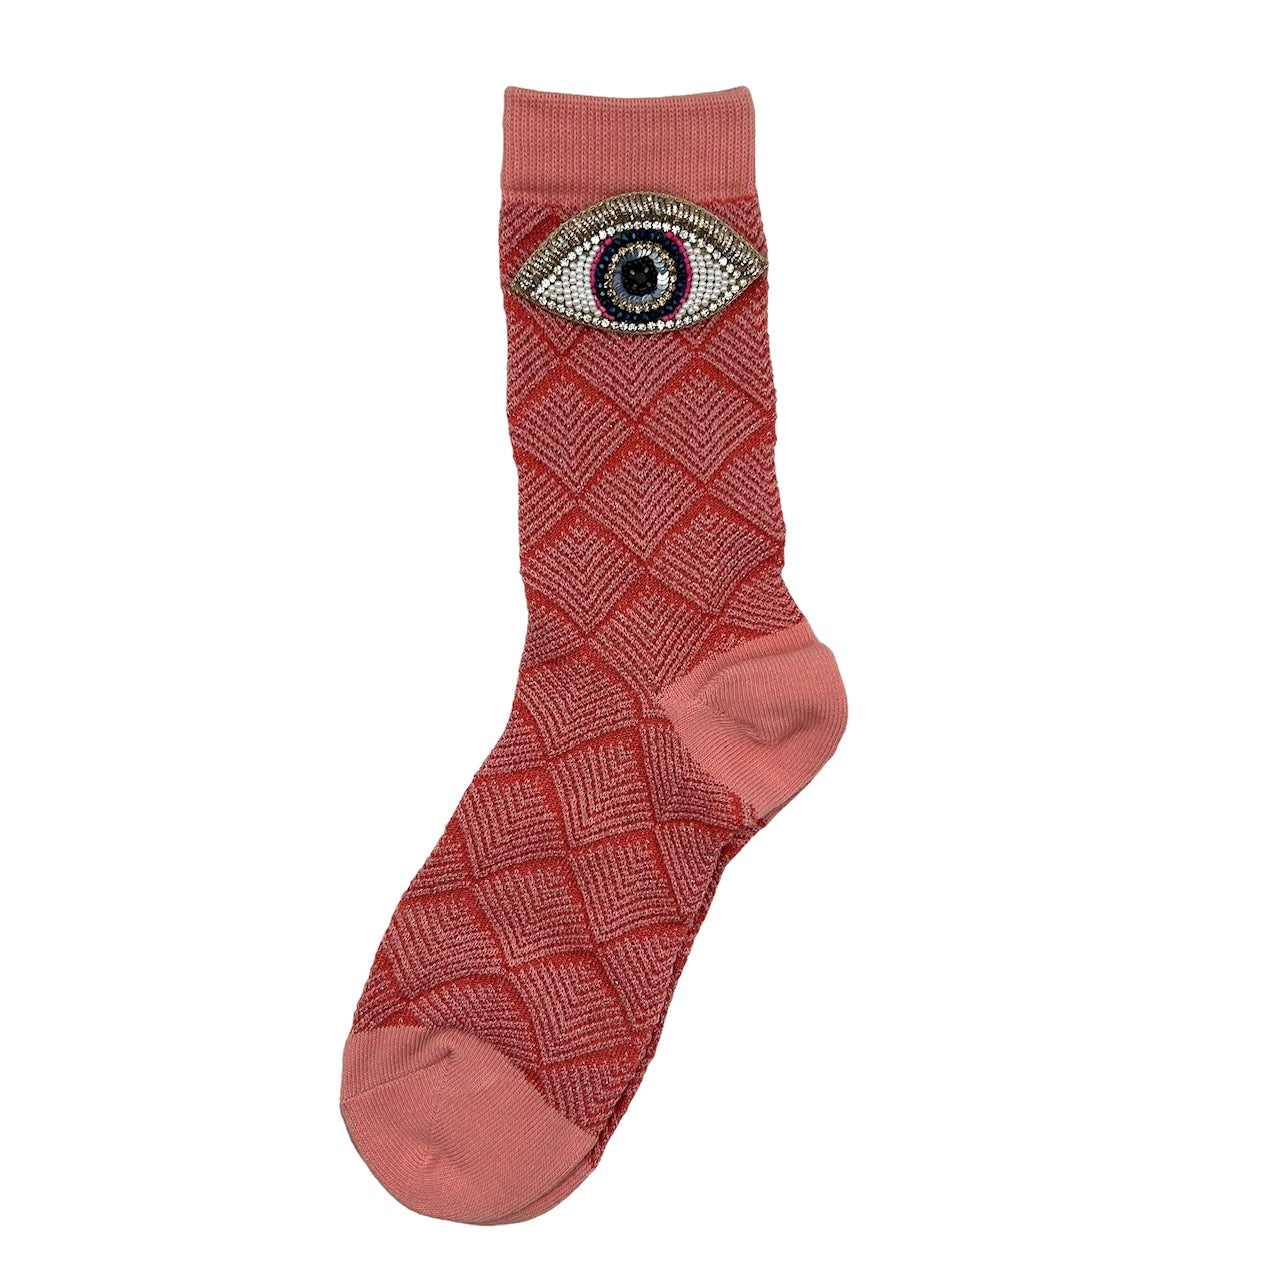 Paris socks in pink with a golden eye